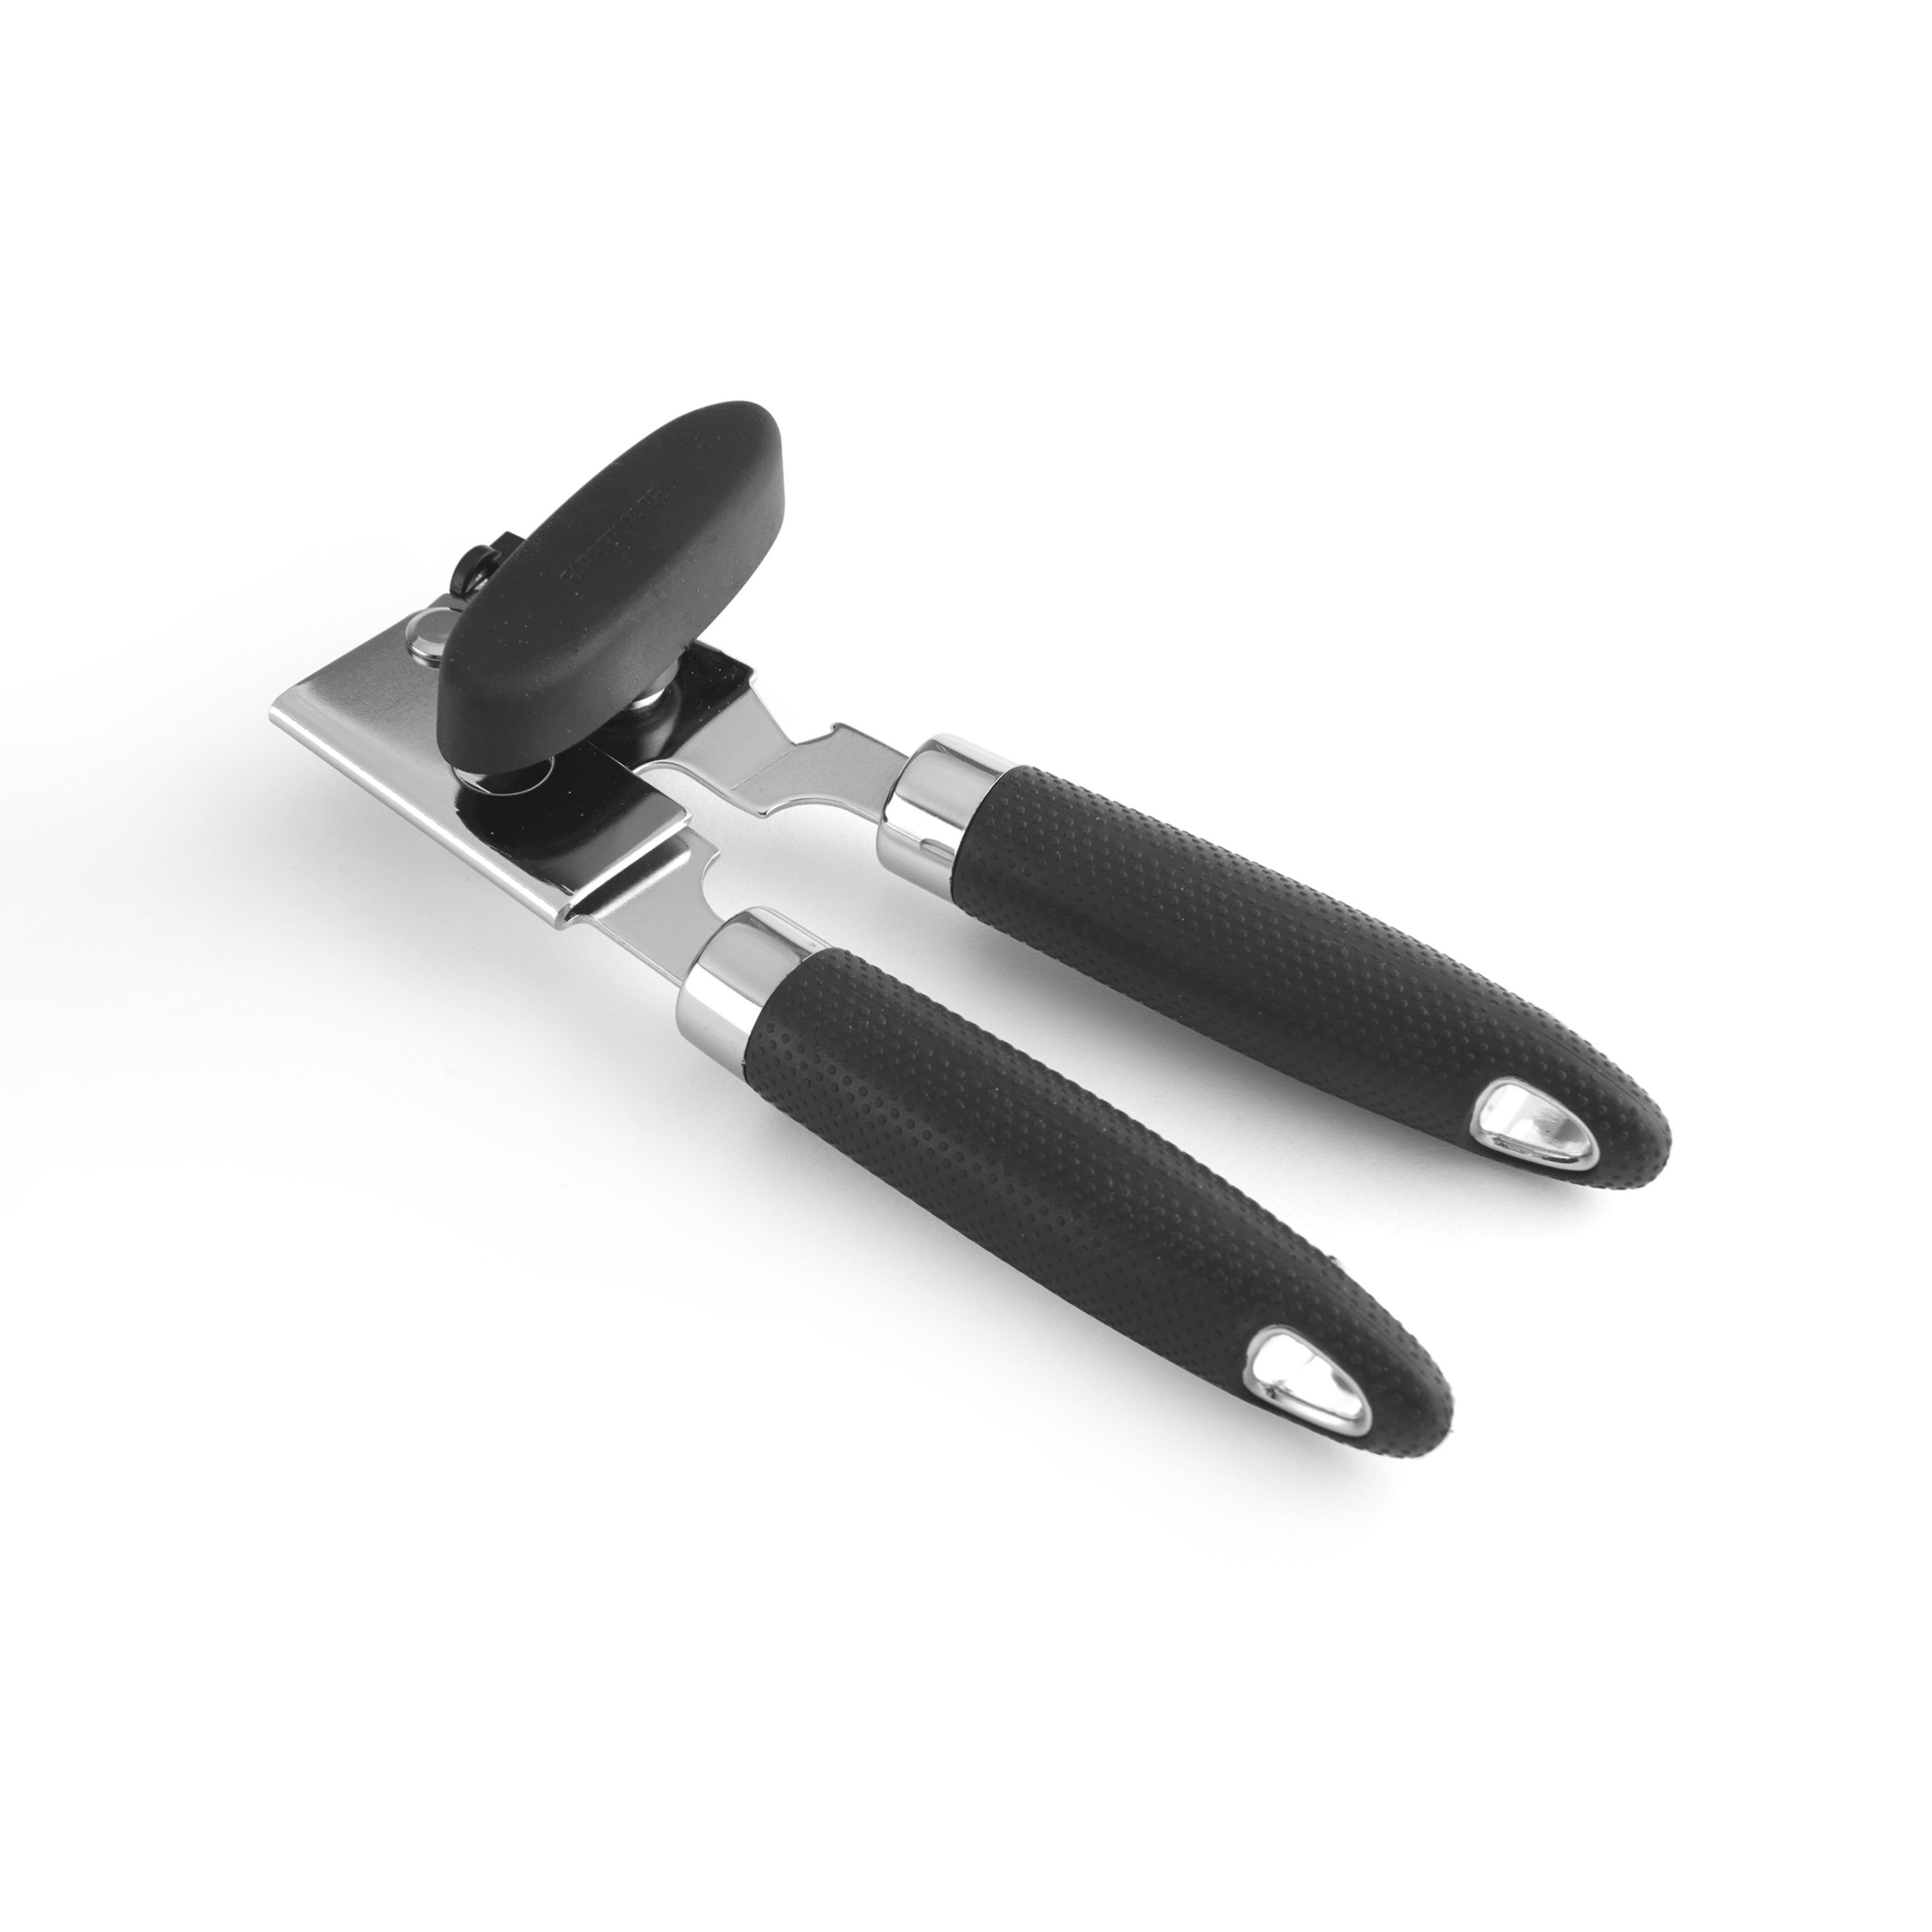 Metaltex Can Opener High-Quality Magnetic Large For Home & Professional Use